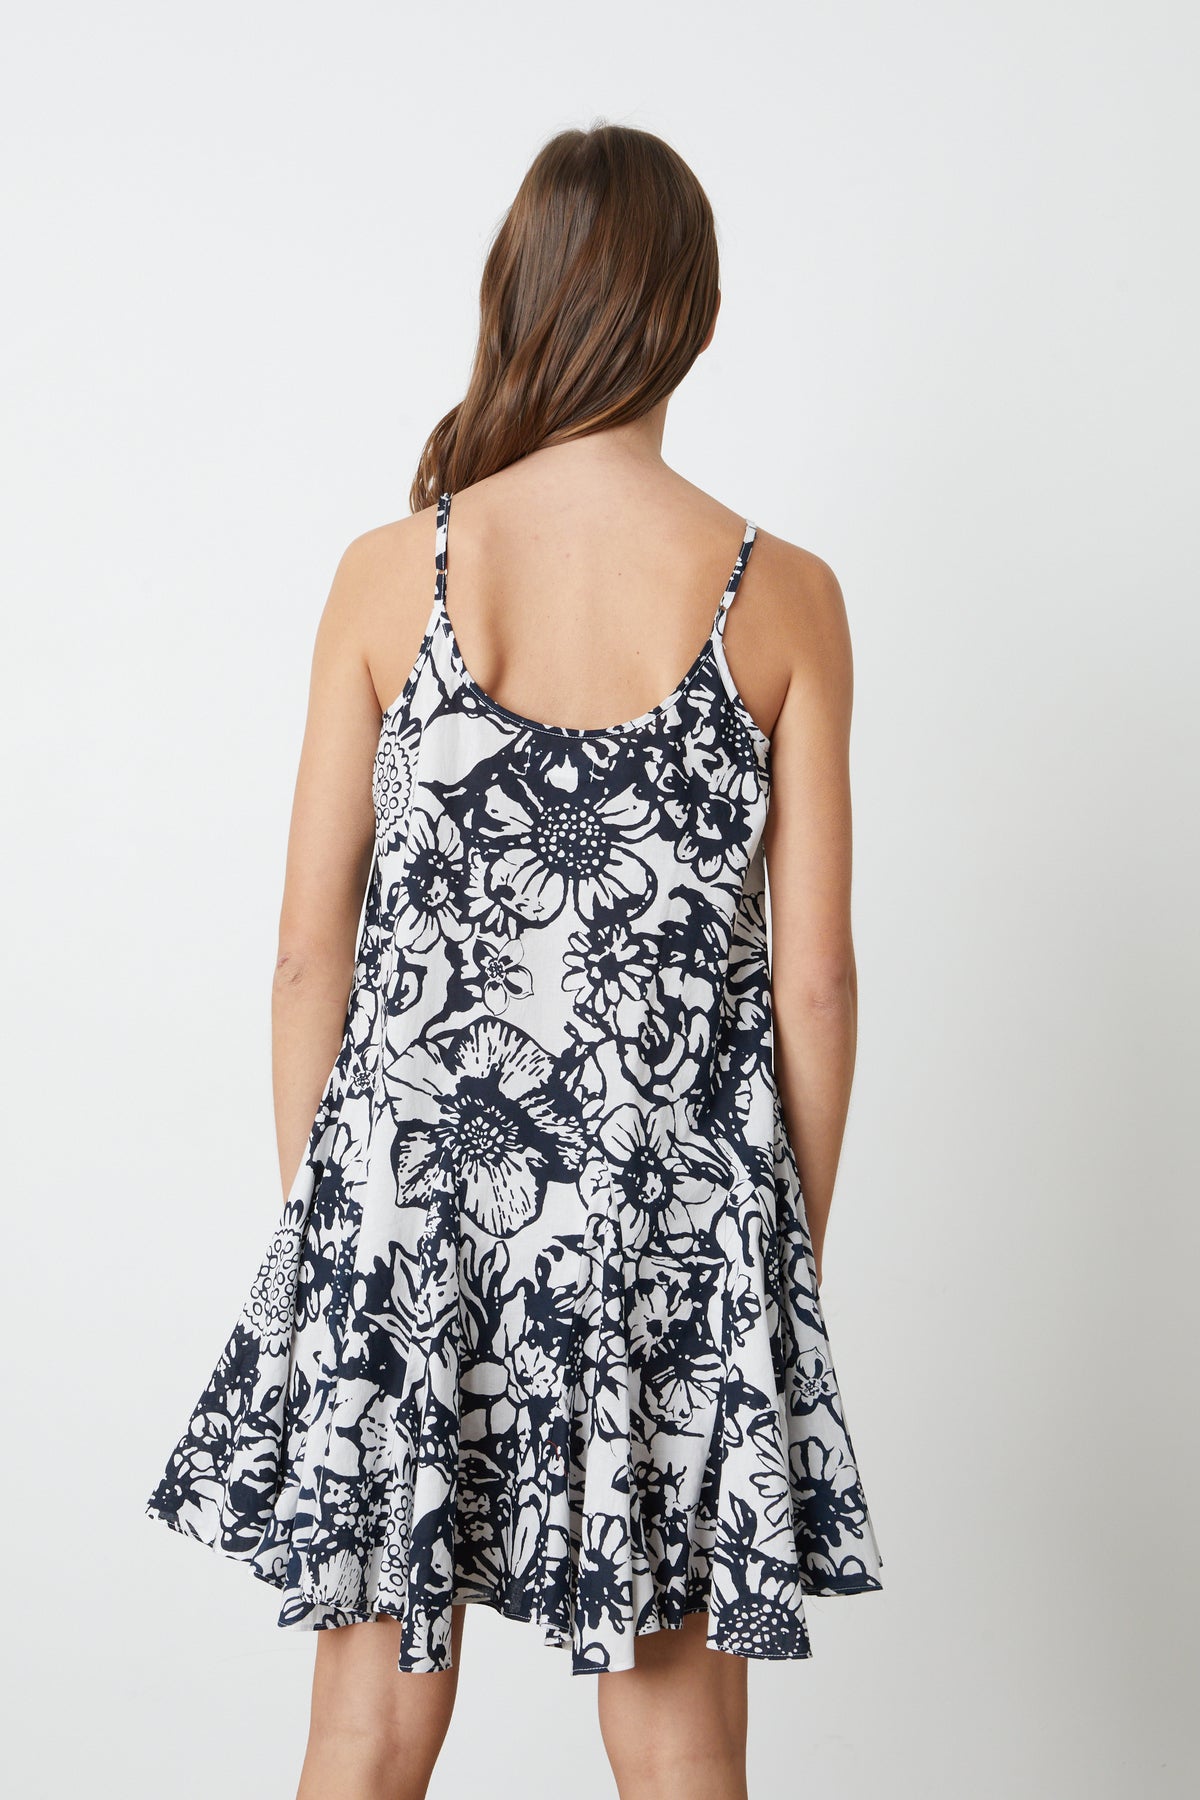 The back view of a woman wearing a Velvet by Graham & Spencer VIVIAN PRINTED DRESS.-26774913319105